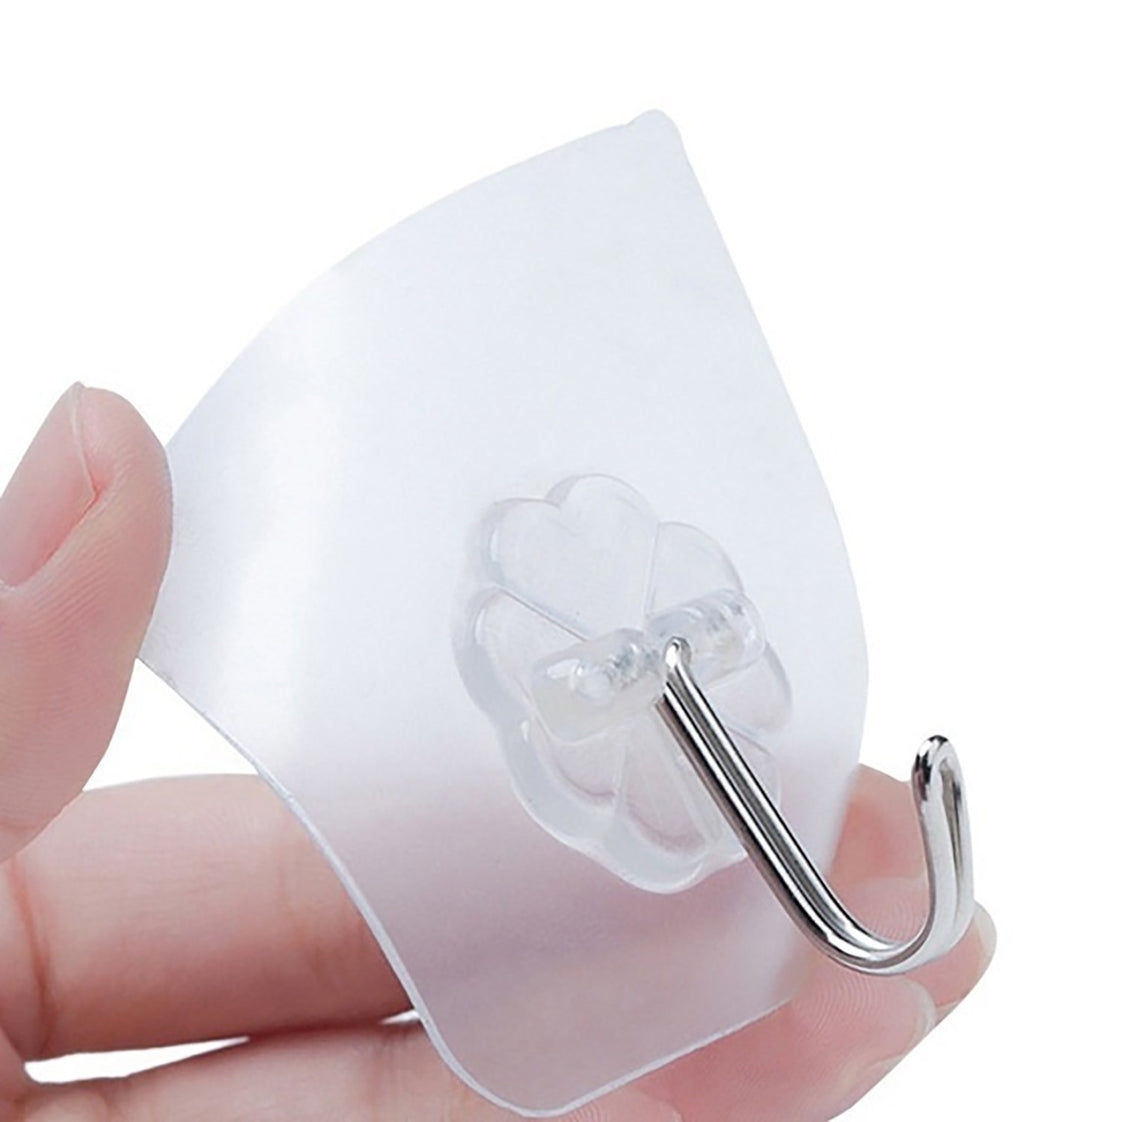 1689 MULTIPURPOSE STRONG SMALL STAINLESS STEEL ADHESIVE WALL HOOKS